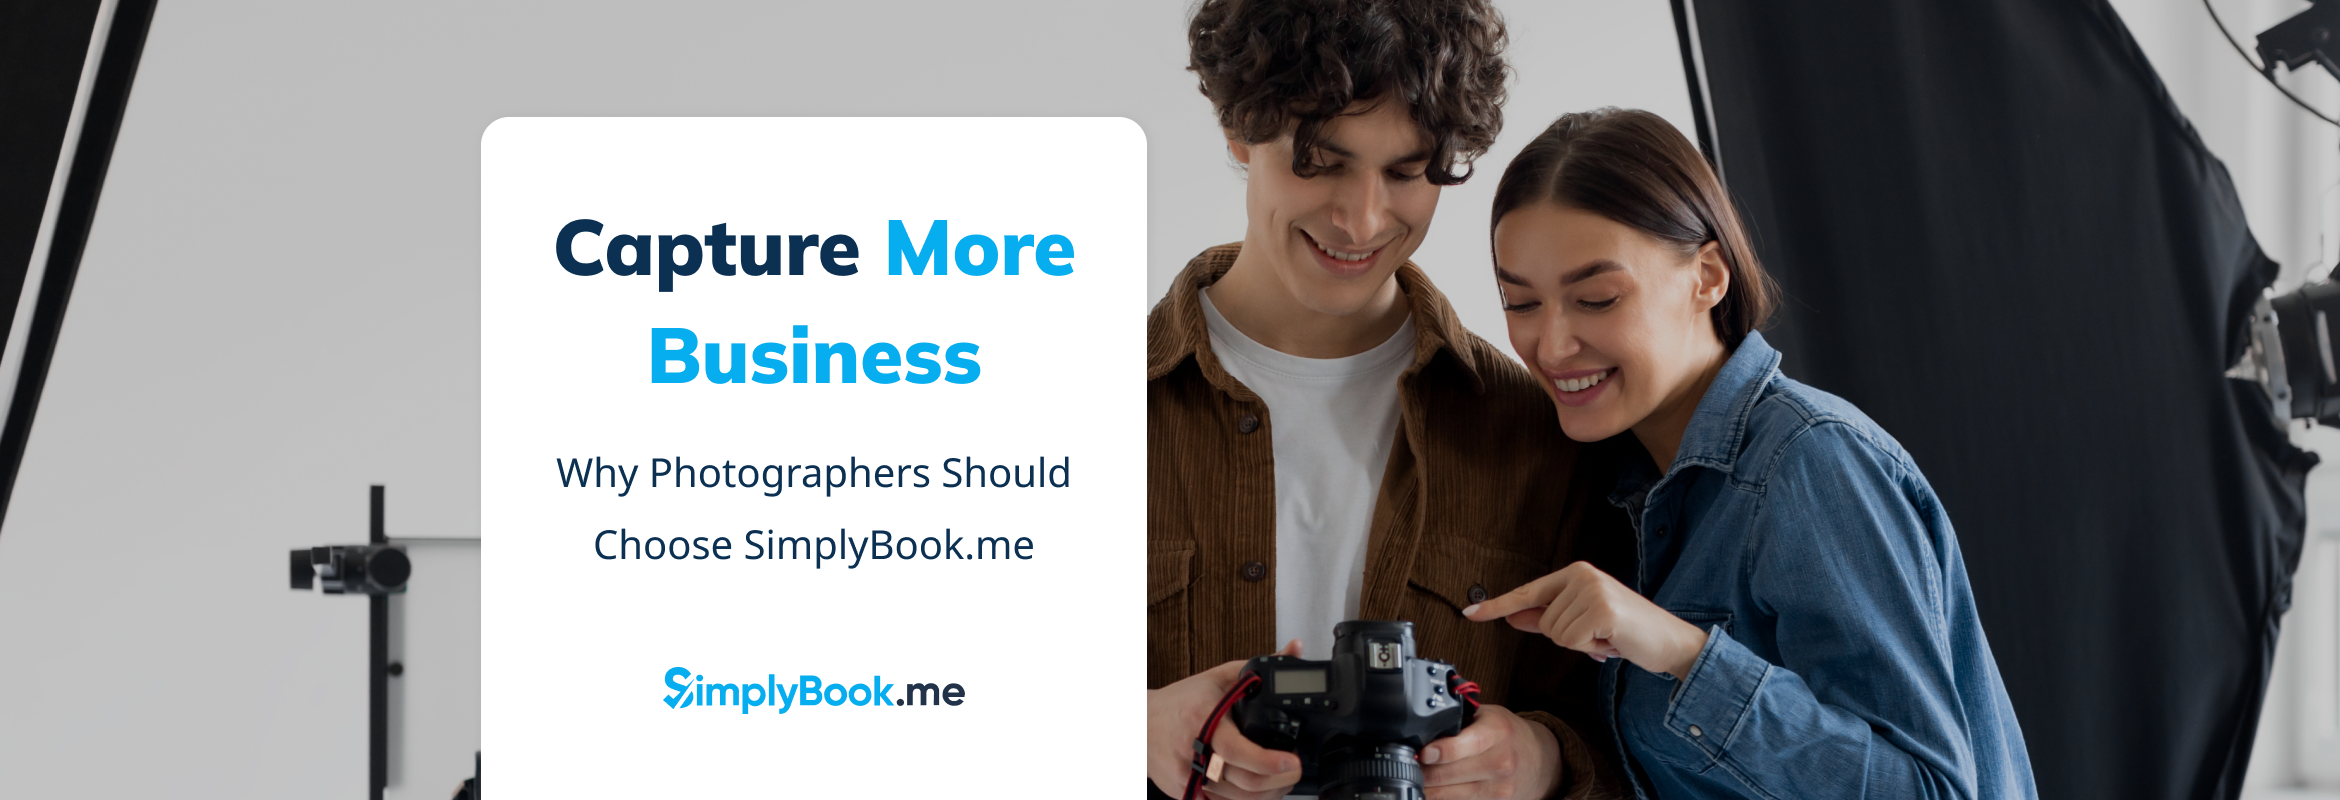 Why photographers should use simplybook.me